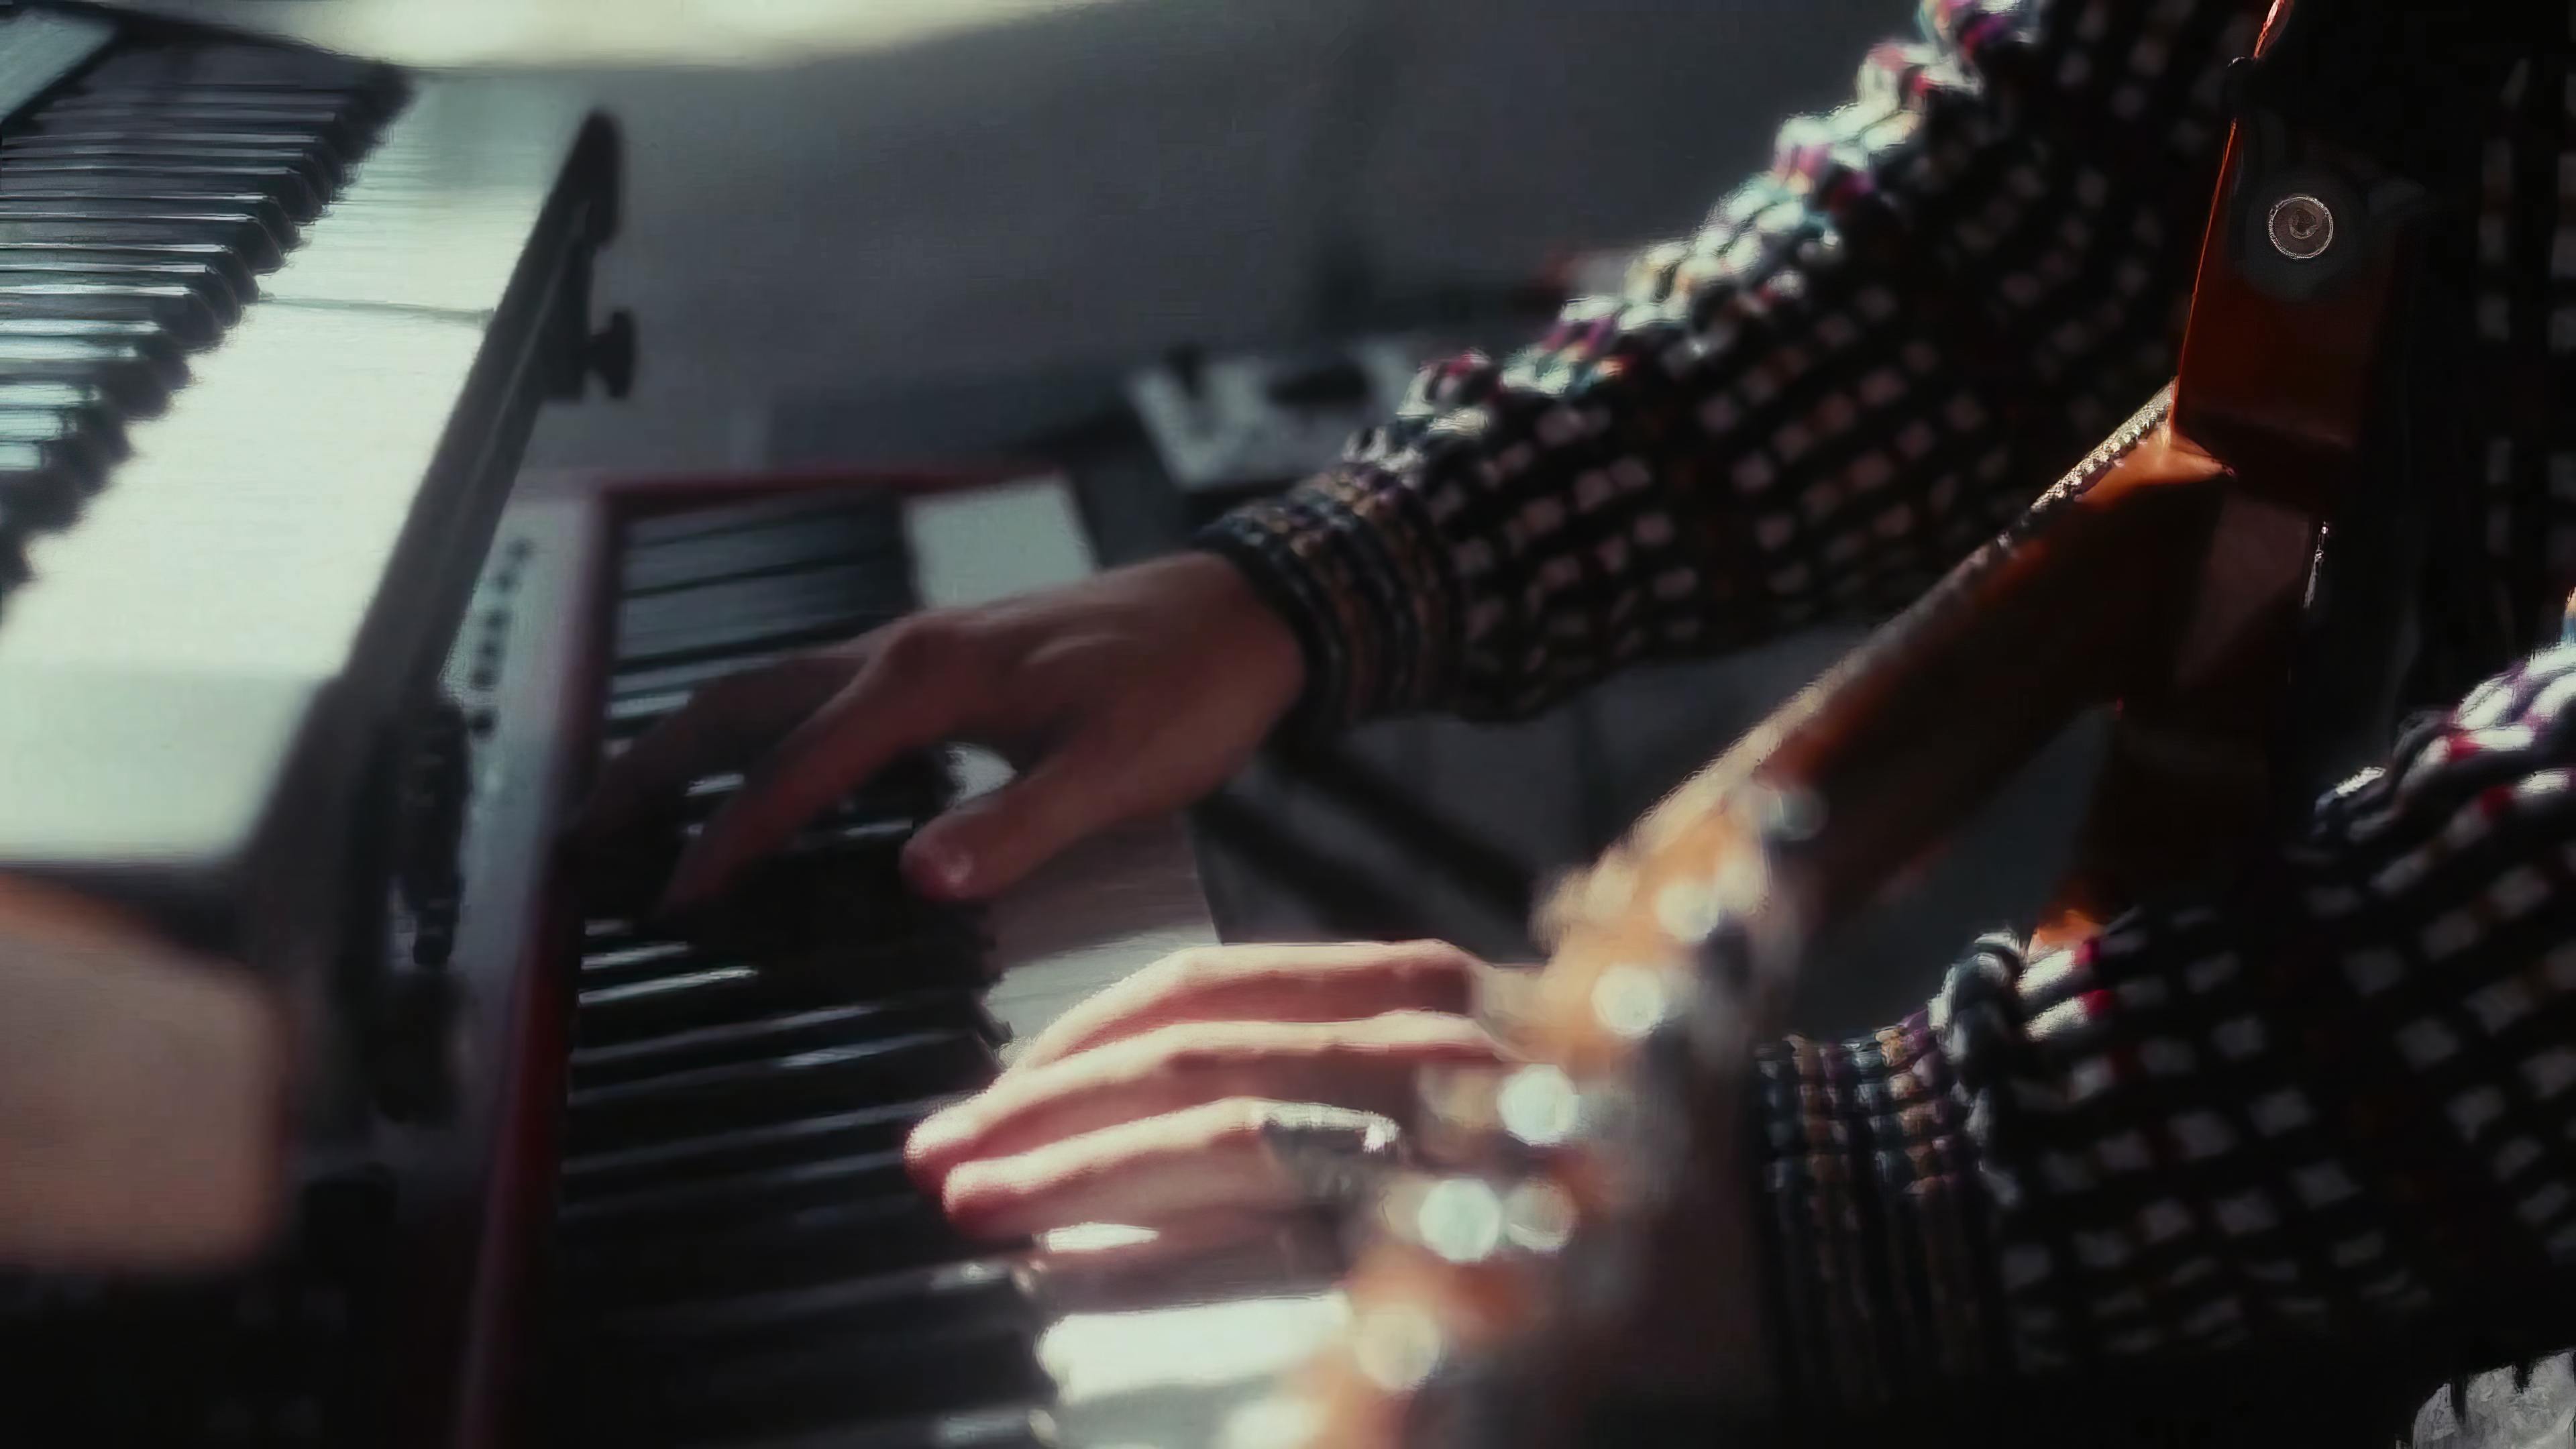 Ritt Momney is playing a keyboard, their hands pressing the keys. The musician is partially visible, dressed in a patterned top, with a glimpse of their face and headphones on. The scene is set indoors, and the lighting casts a warm, intimate glow on the instrument and the player.